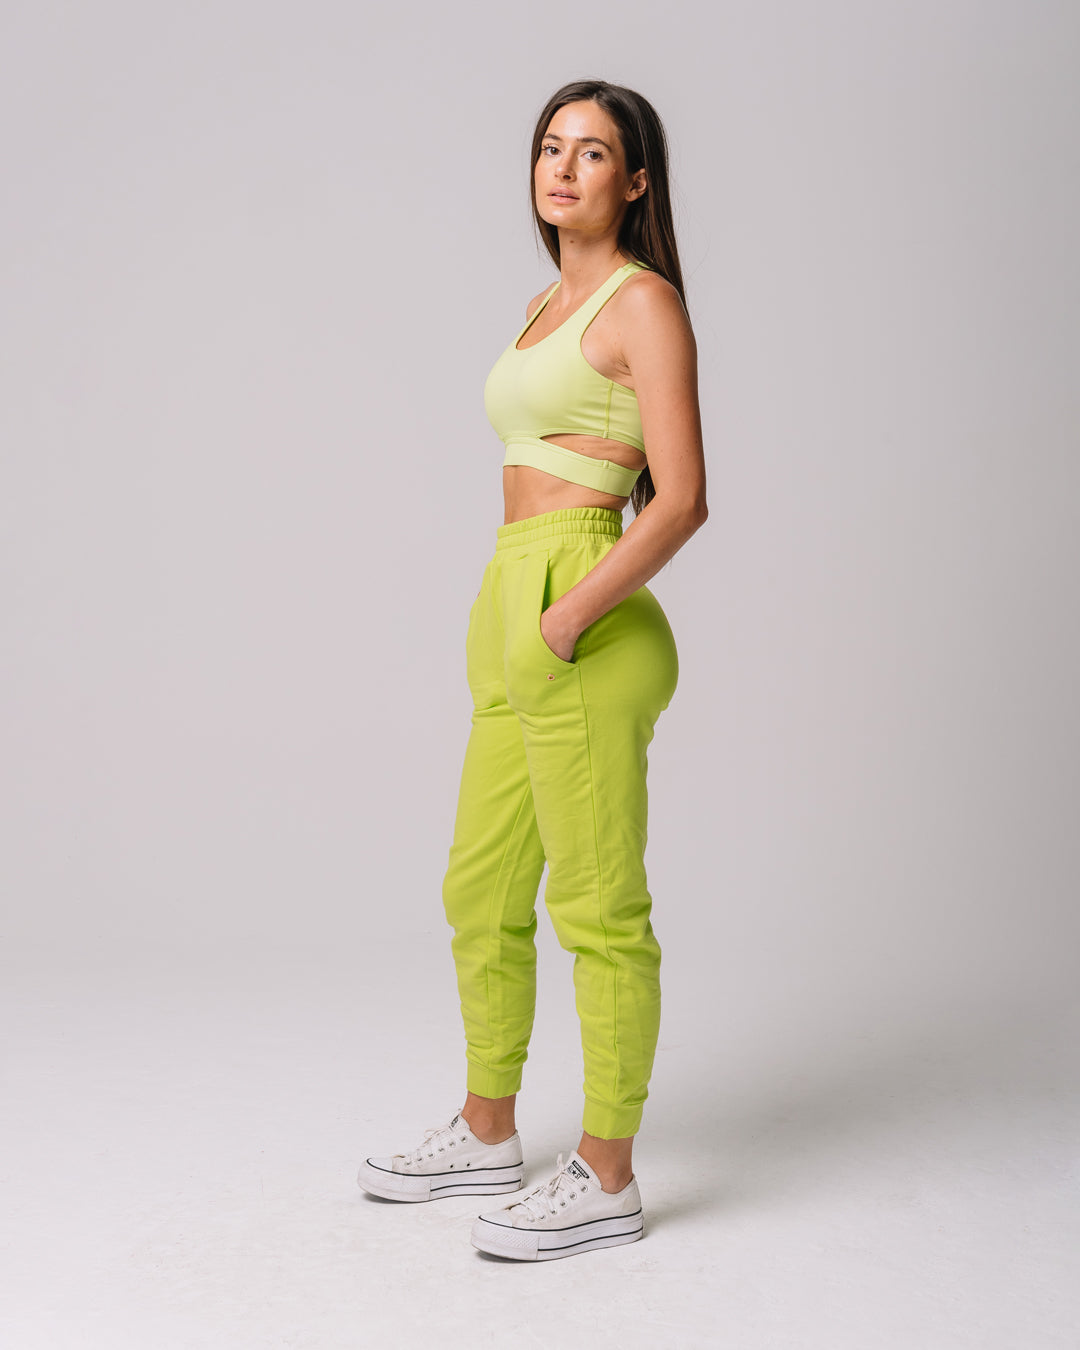 KADYLUXE® womens fleece sweatpant in lime color side view